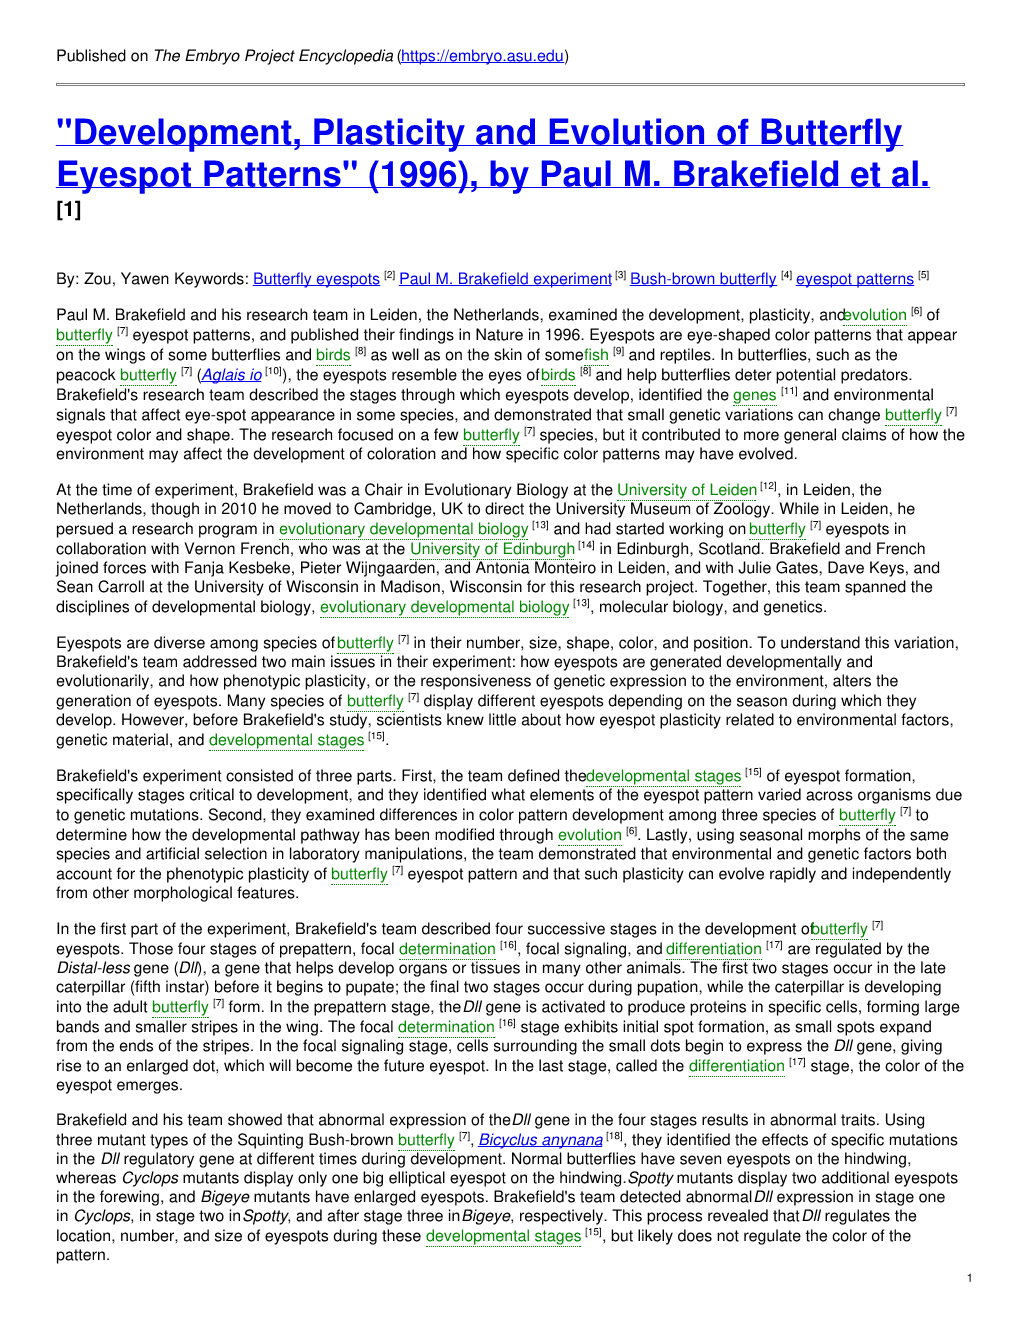 Development, Plasticity and Evolution of Butterfly Eyespot Patterns" (1996), by Paul M